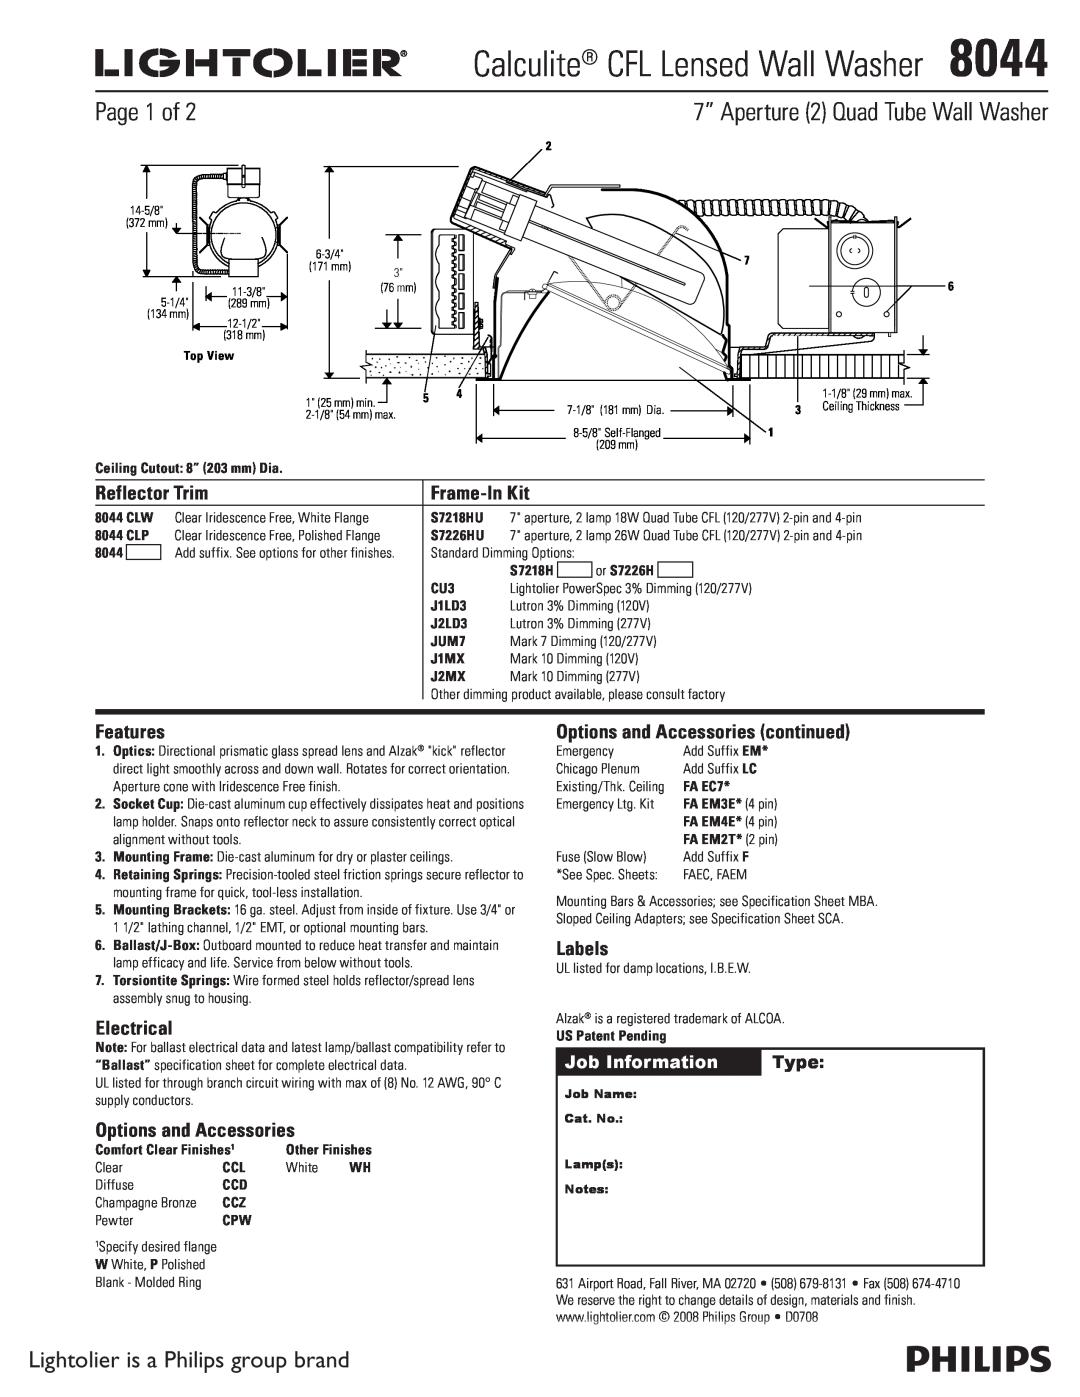 Lightolier 8044 specifications Page 1 of, 7” Aperture 2 Quad Tube Wall Washer, Lightolier is a Philips group brand, Labels 